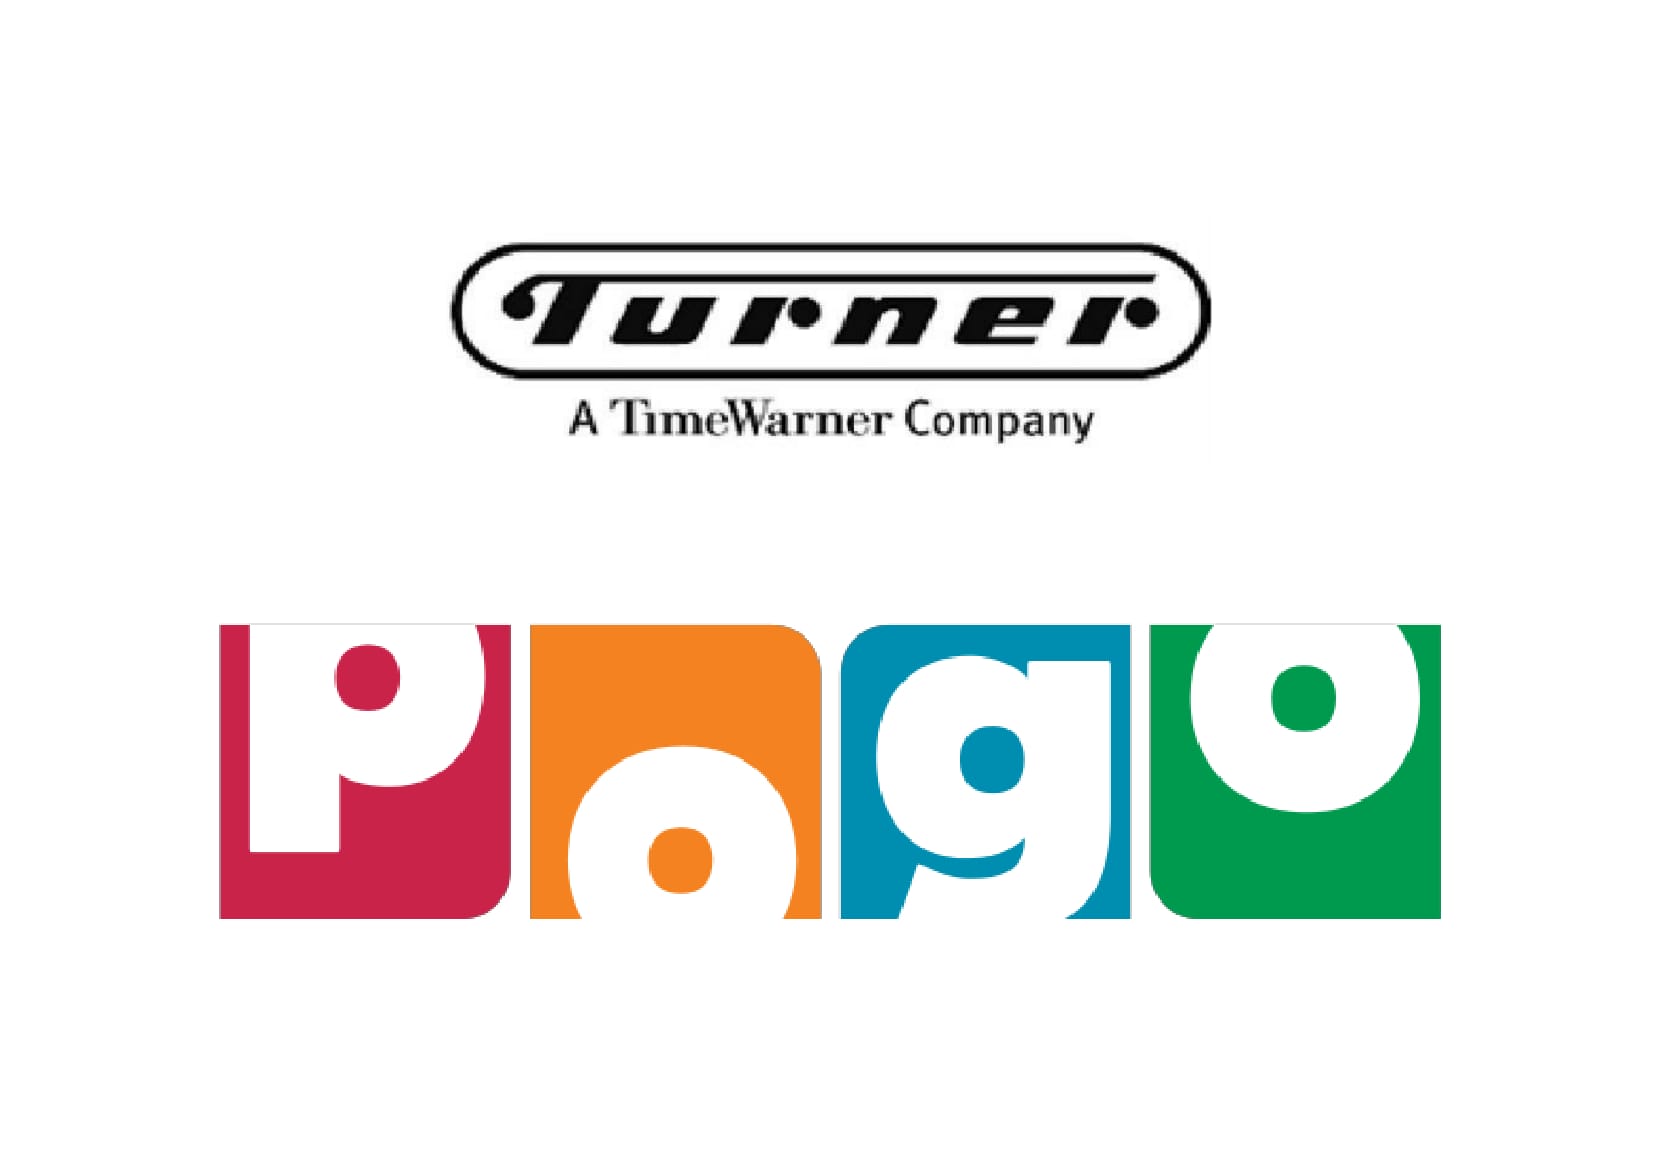 Turner International India Pvt. Ltd. is the Indian arm of the Turner Broadcasting System, a Time Warner company. Turner's content is across multiple genres and partnerships that include Kids'TV and interactive entertainment brands like Cartoon Network, Pogo, Toonami, WB channels, HBO, TCM, and CNN India amongst others. | POGO is Turner's only-for-India, kids’ entertainment channel since 2004. Pogo is amongst India’s leading kids’ channels featuring animated and live action content spanning multiple genres from comedy and art to games and curiosity. www.pogo.tv